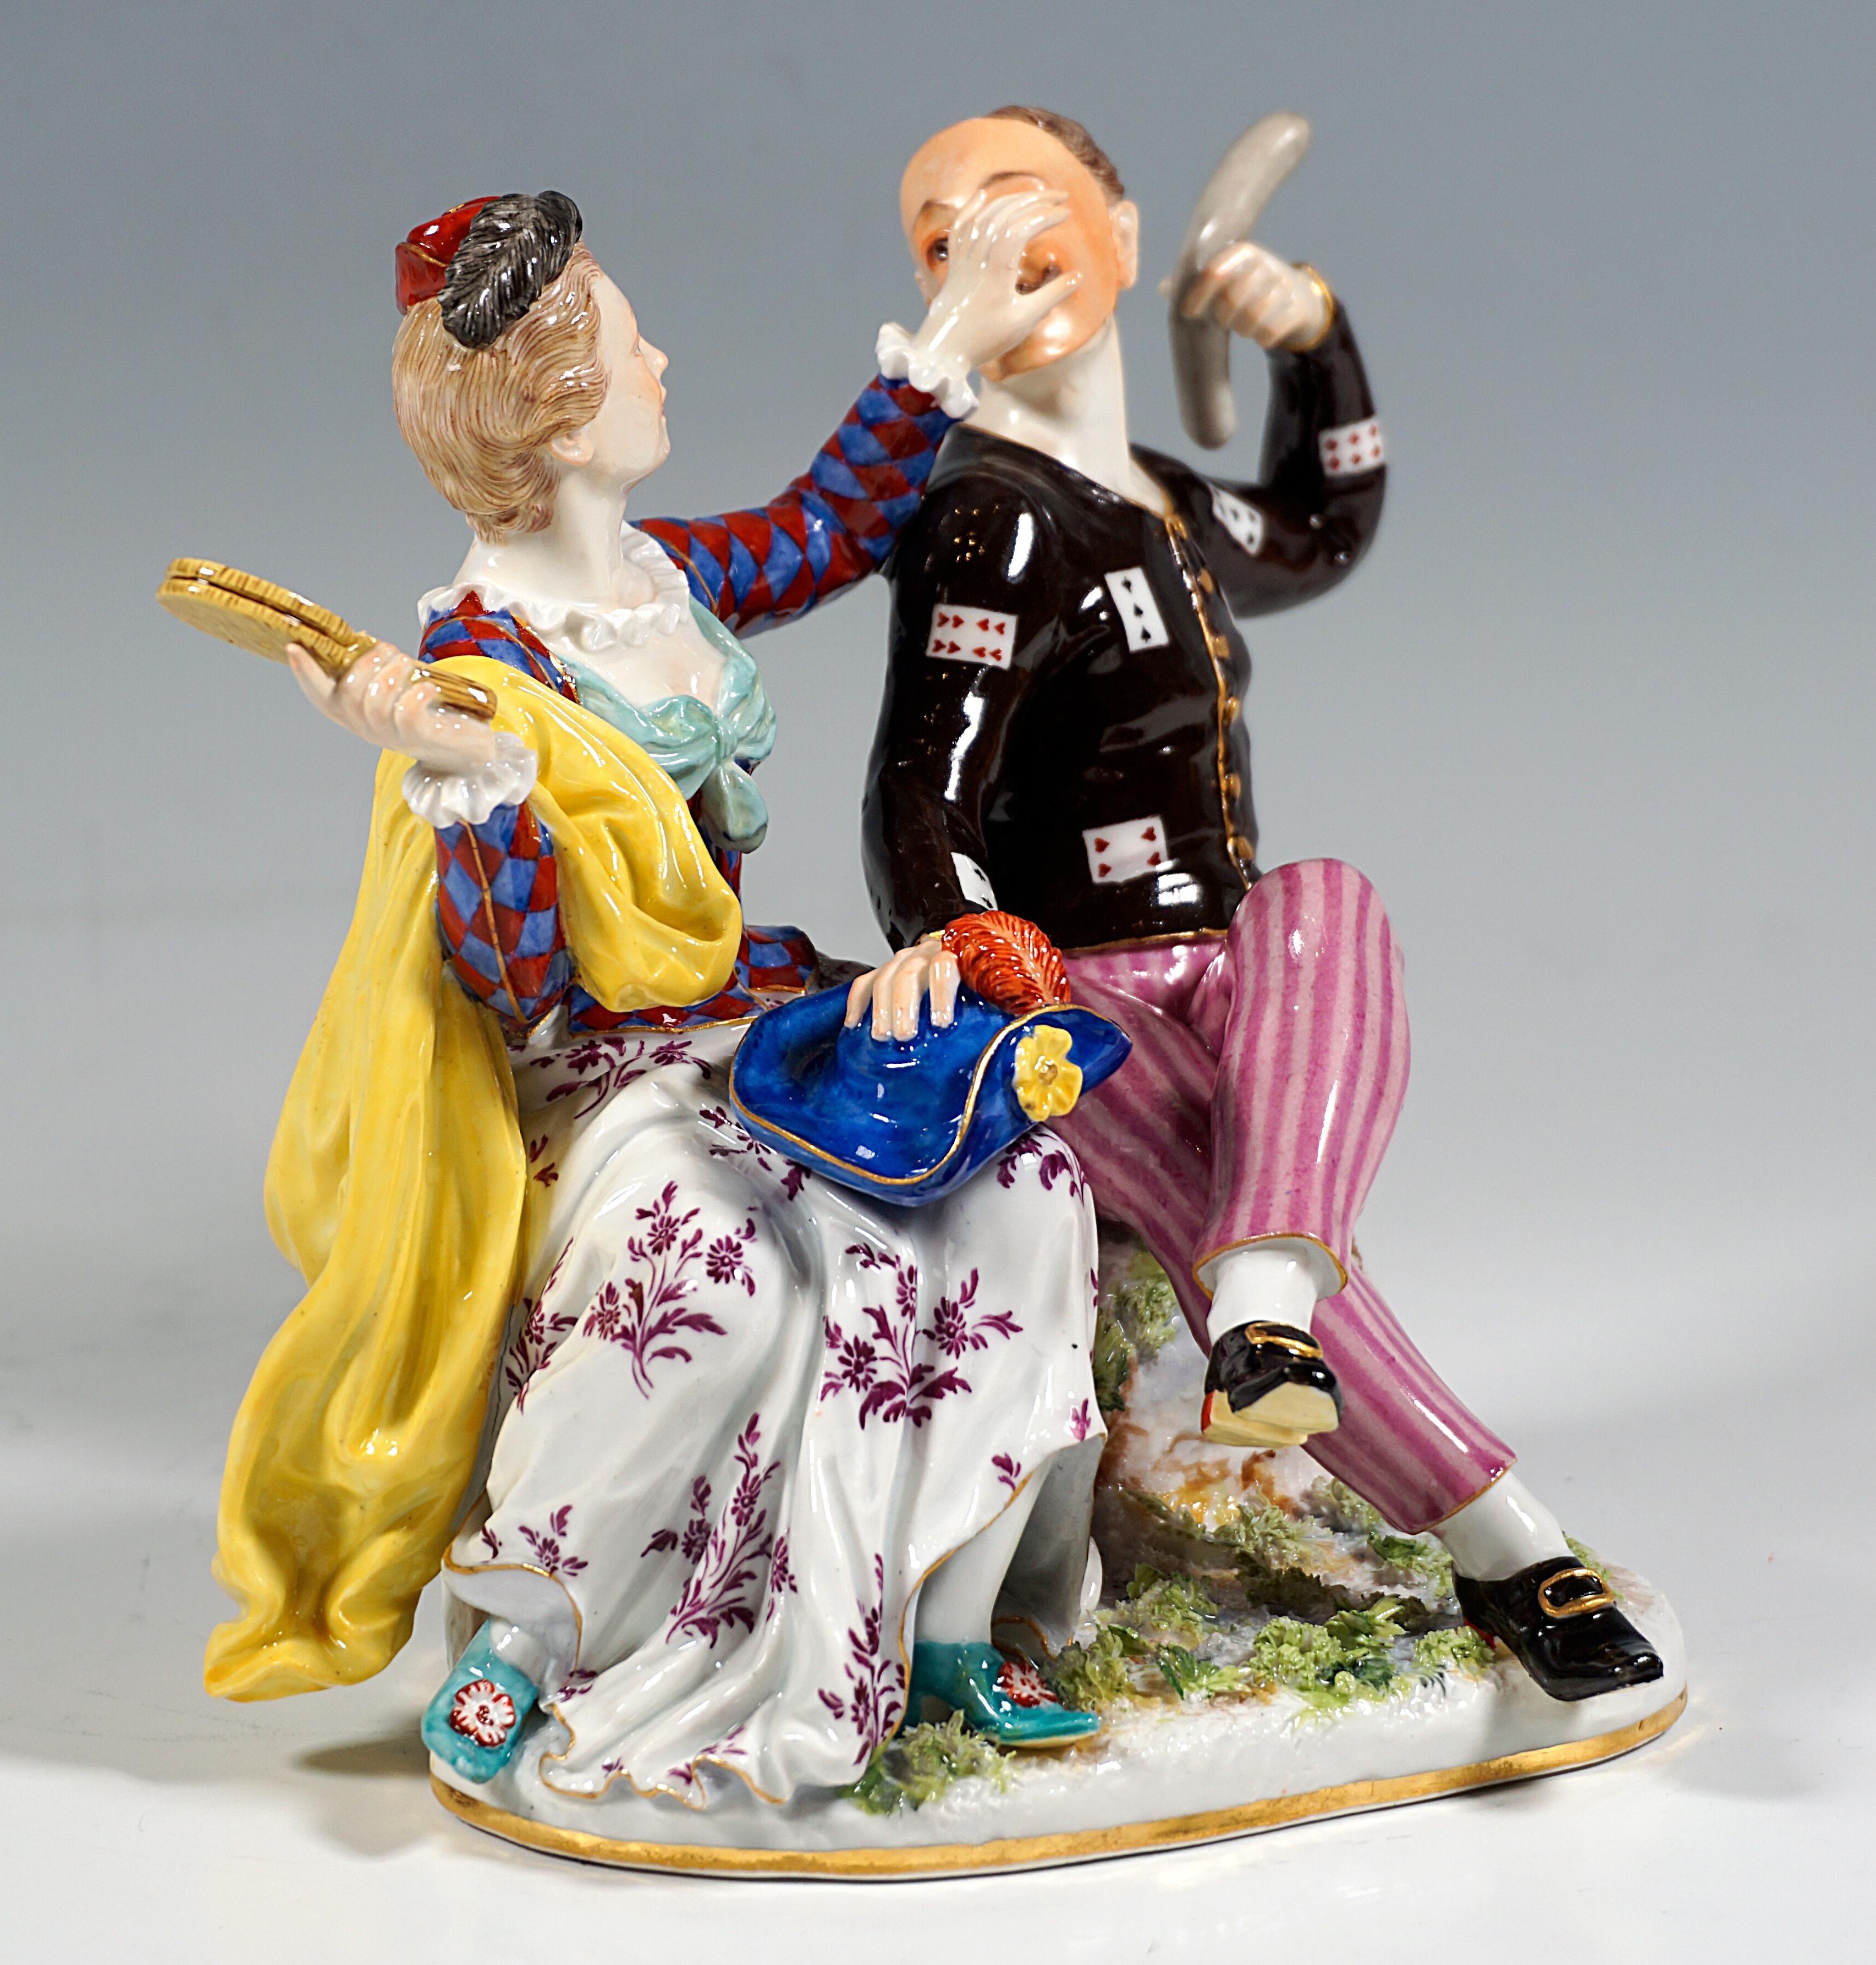 Very rare 19th century Meissen porcelain group:
Harlequin and Columbine seated side by side on a rock and teasing each other: Harlequin in brown playing card patterned jacket, pink striped trousers, black buckled shoes and mask fully covering his